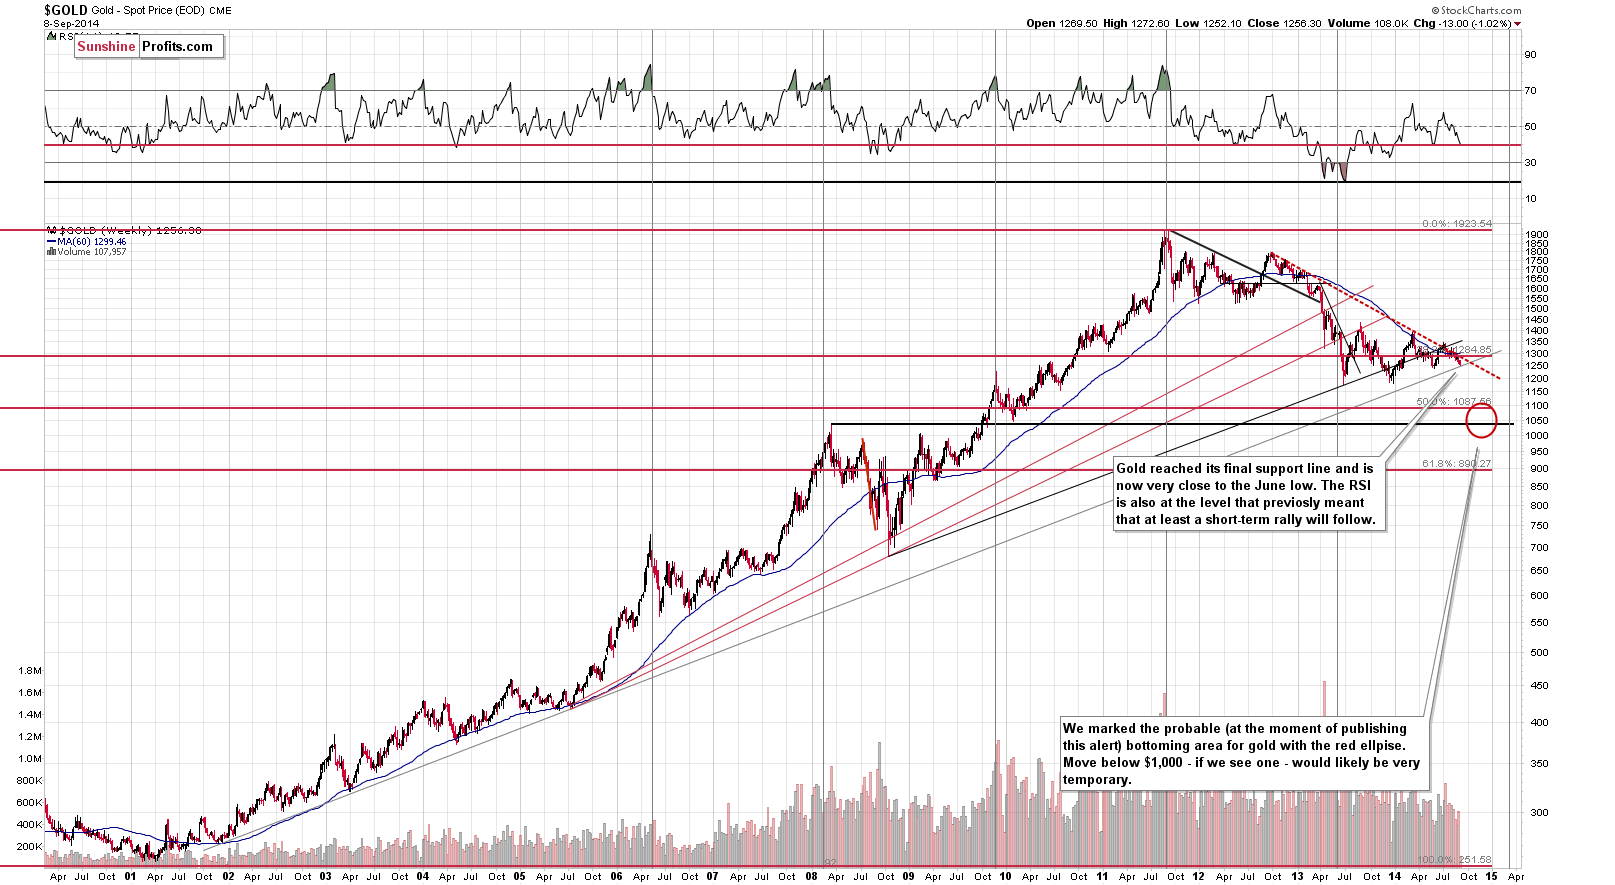 Long-term Gold price chart - Gold spot price